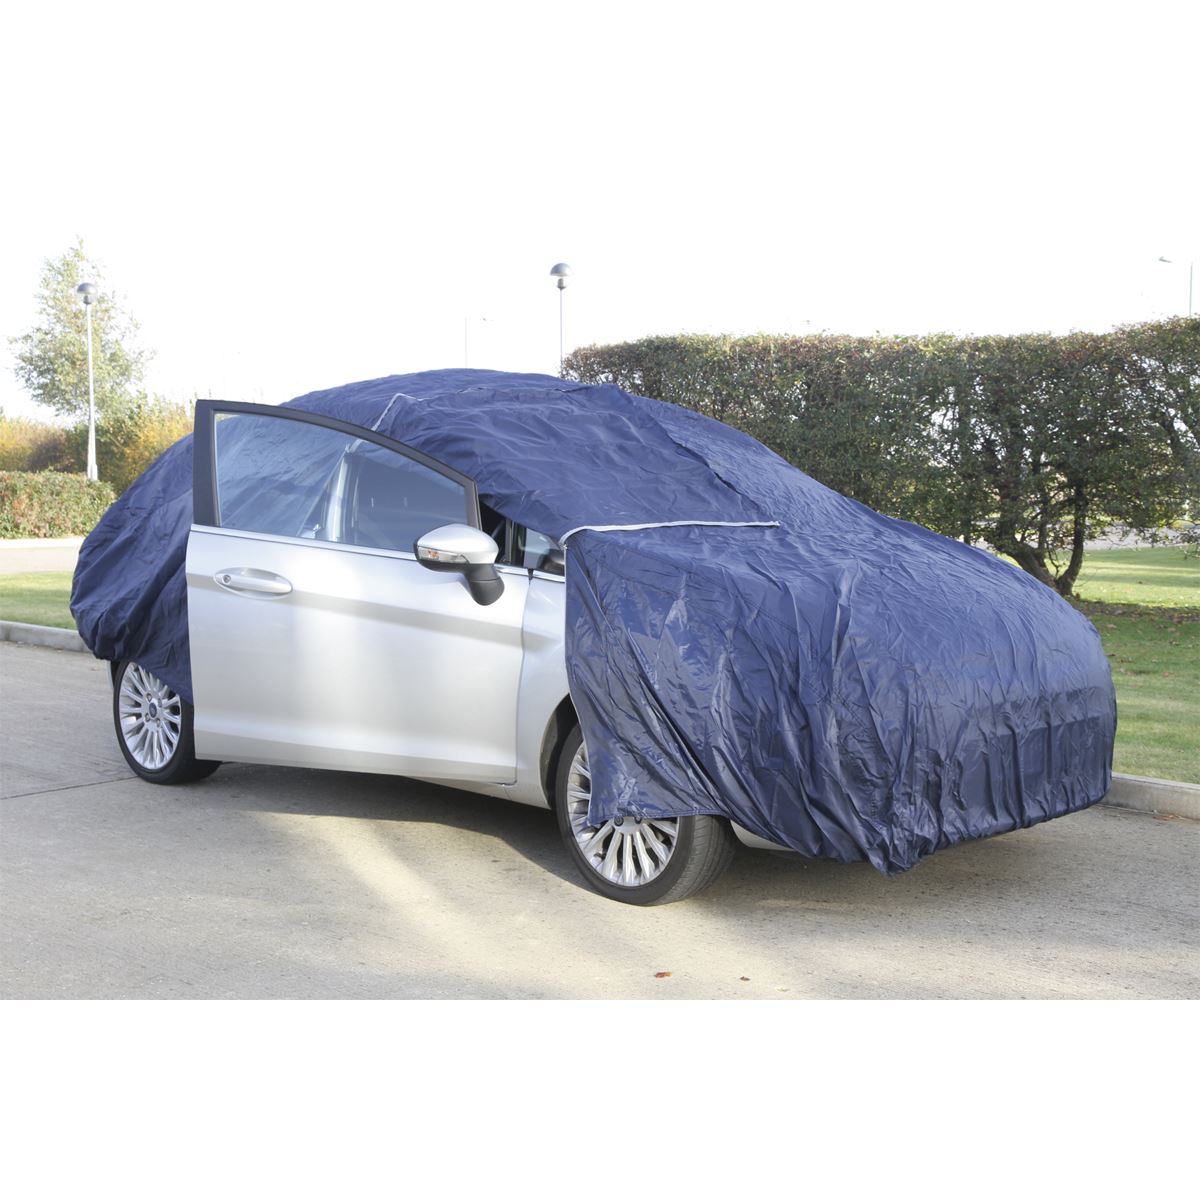 Sealey Car Cover Lightweight X-Large 4830 x 1780 x 1220mm